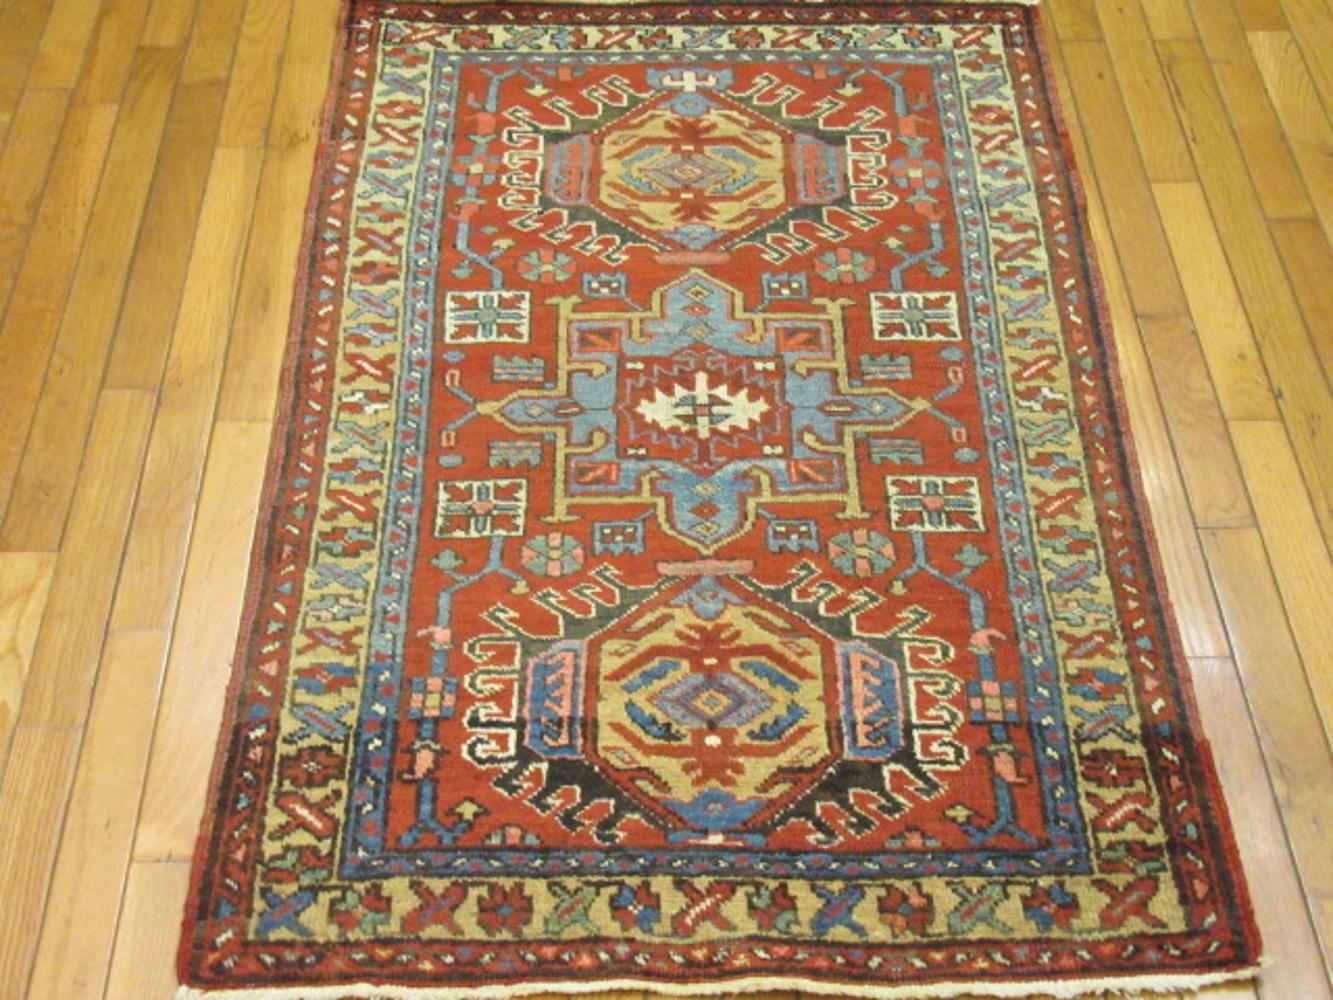 This is a small antique hand-knotted Persian Heriz rug made with wool colored with natural dyes on a cotton foundation. It has the multiple medallion common in Karajeh rugs. It measures 2' 8'' x 4' 5'' and in great condition. A perfect rug for any